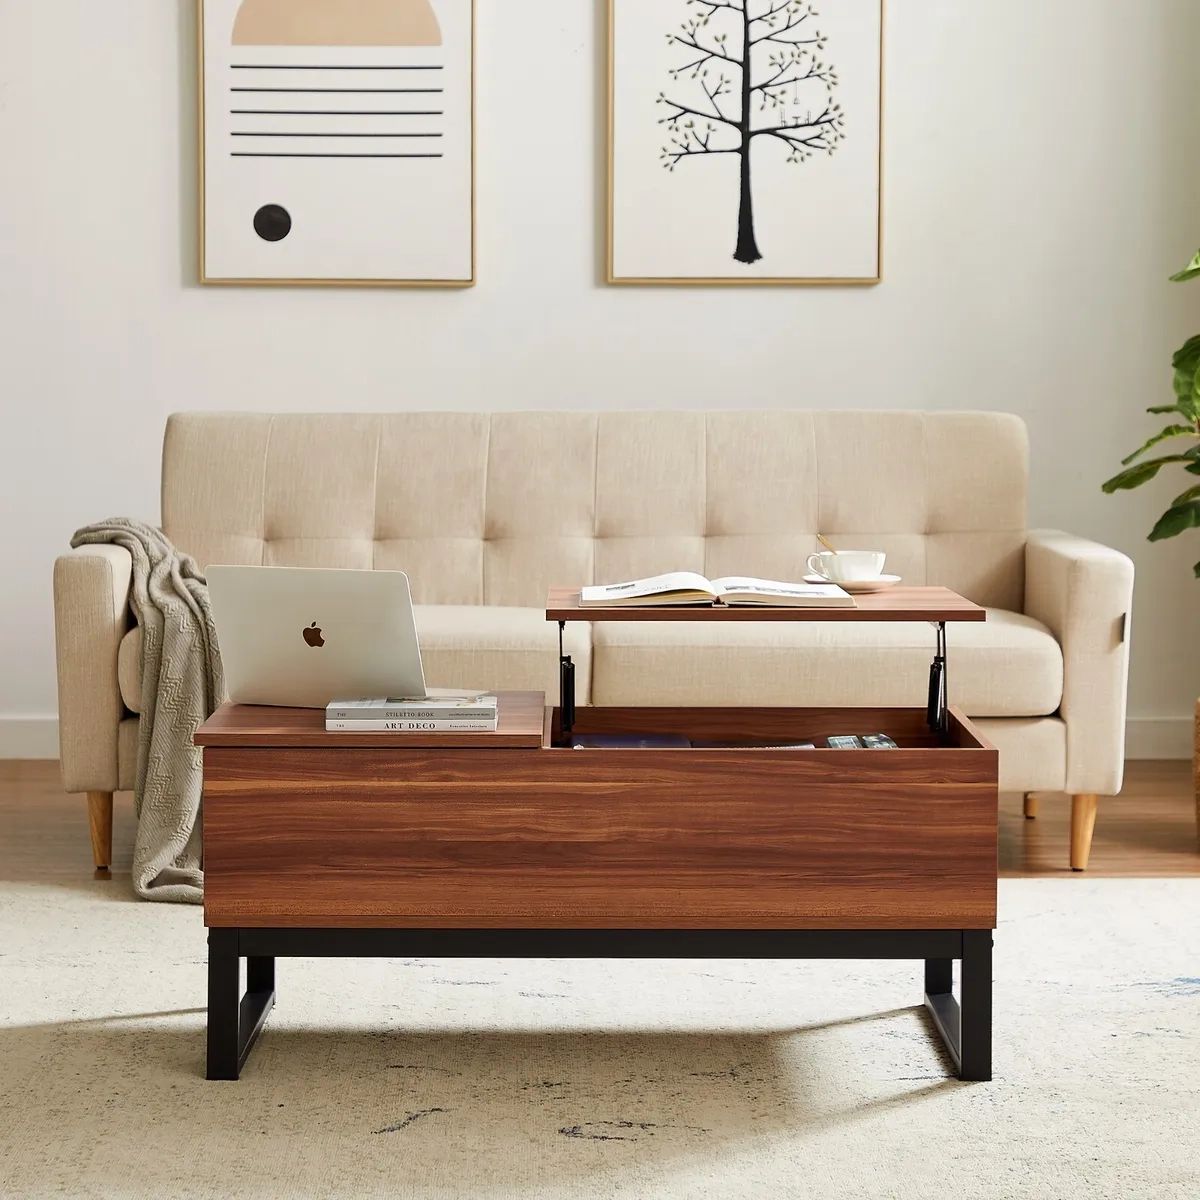 Wood Lift Top Coffee Table For Living Room,Small Coffee Table With Storage  Brown | Ebay Pertaining To Wood Lift Top Coffee Tables (View 7 of 15)